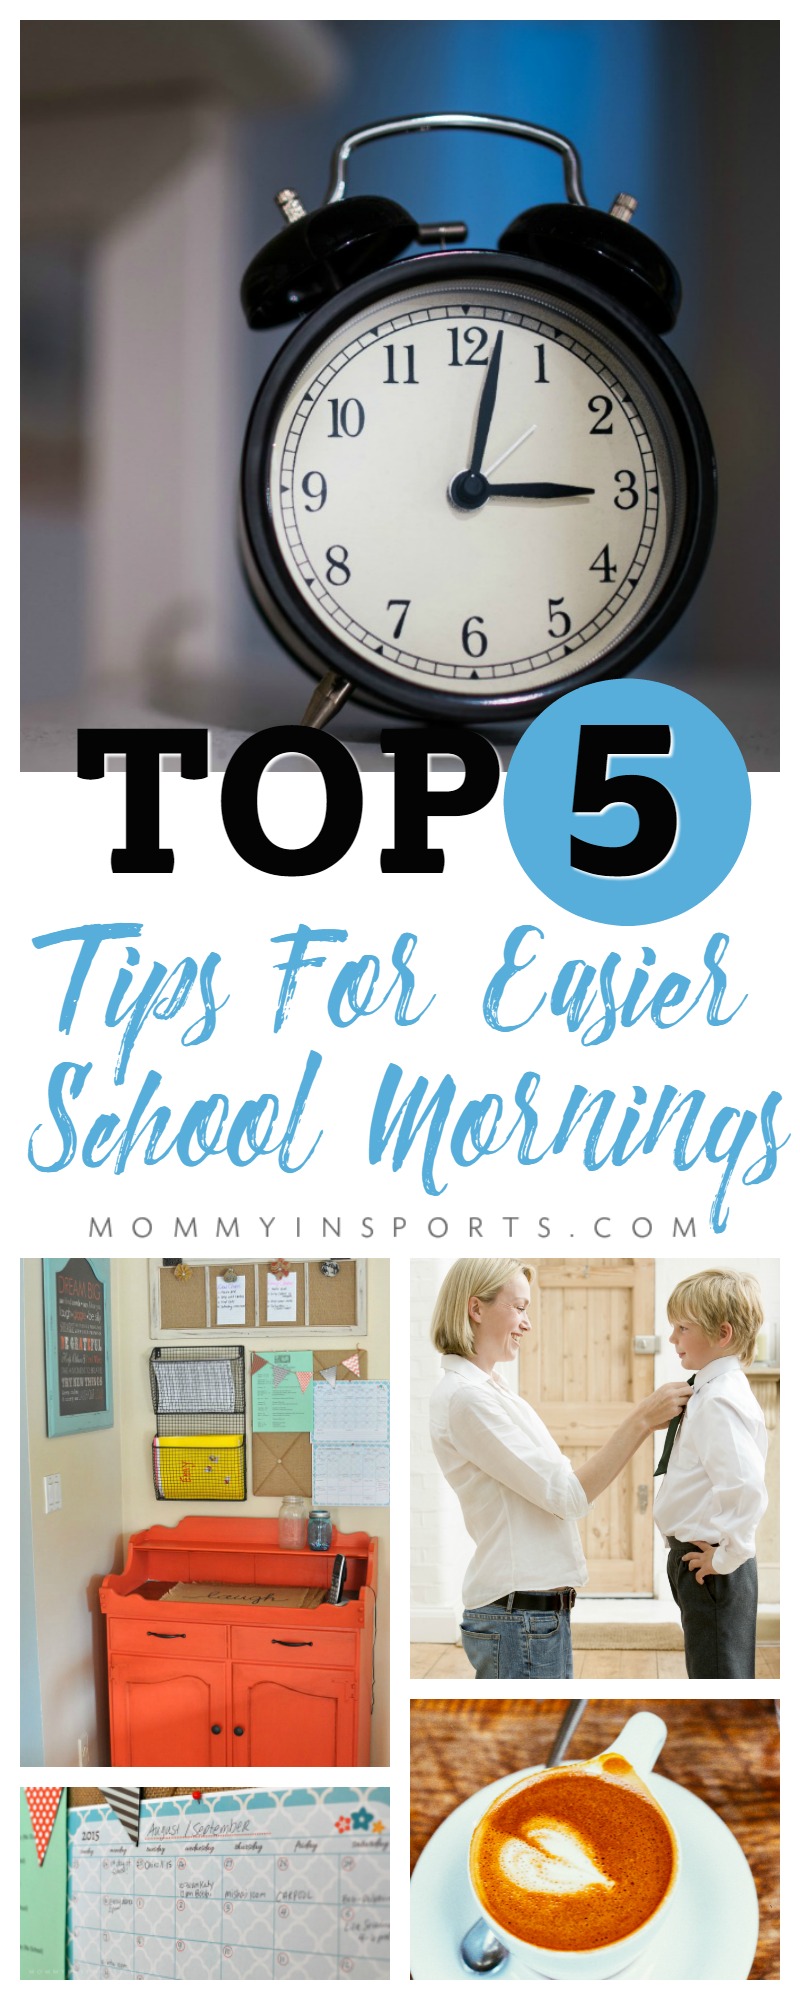 Having a rough time getting back to school routines? Try these top 5 tips for easier school mornings and make everyone's life so much happier!